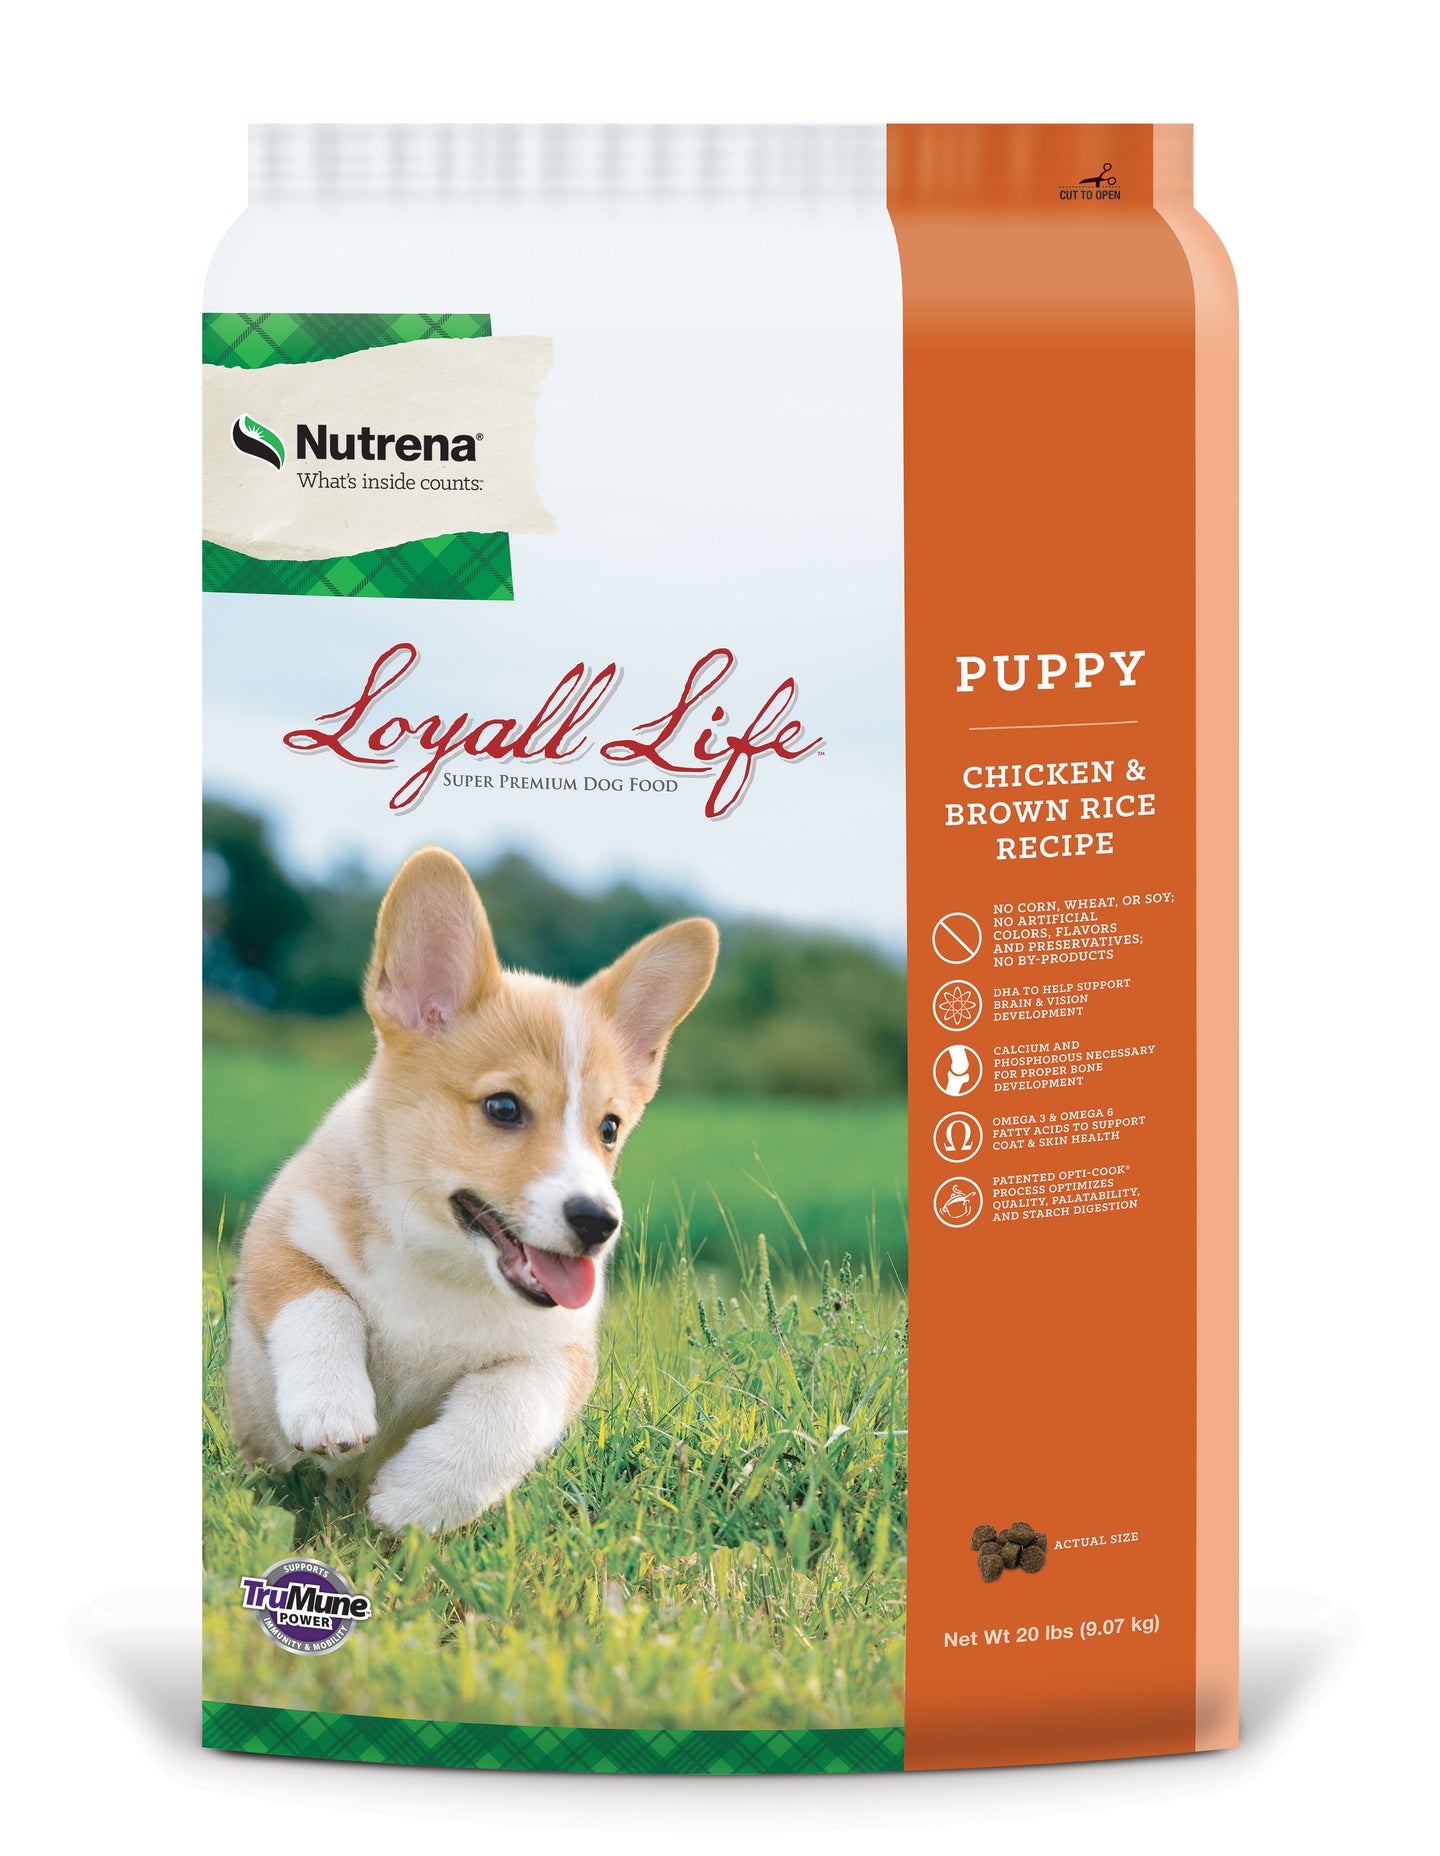 Loyall Life Puppy Chicken & Brown Rice